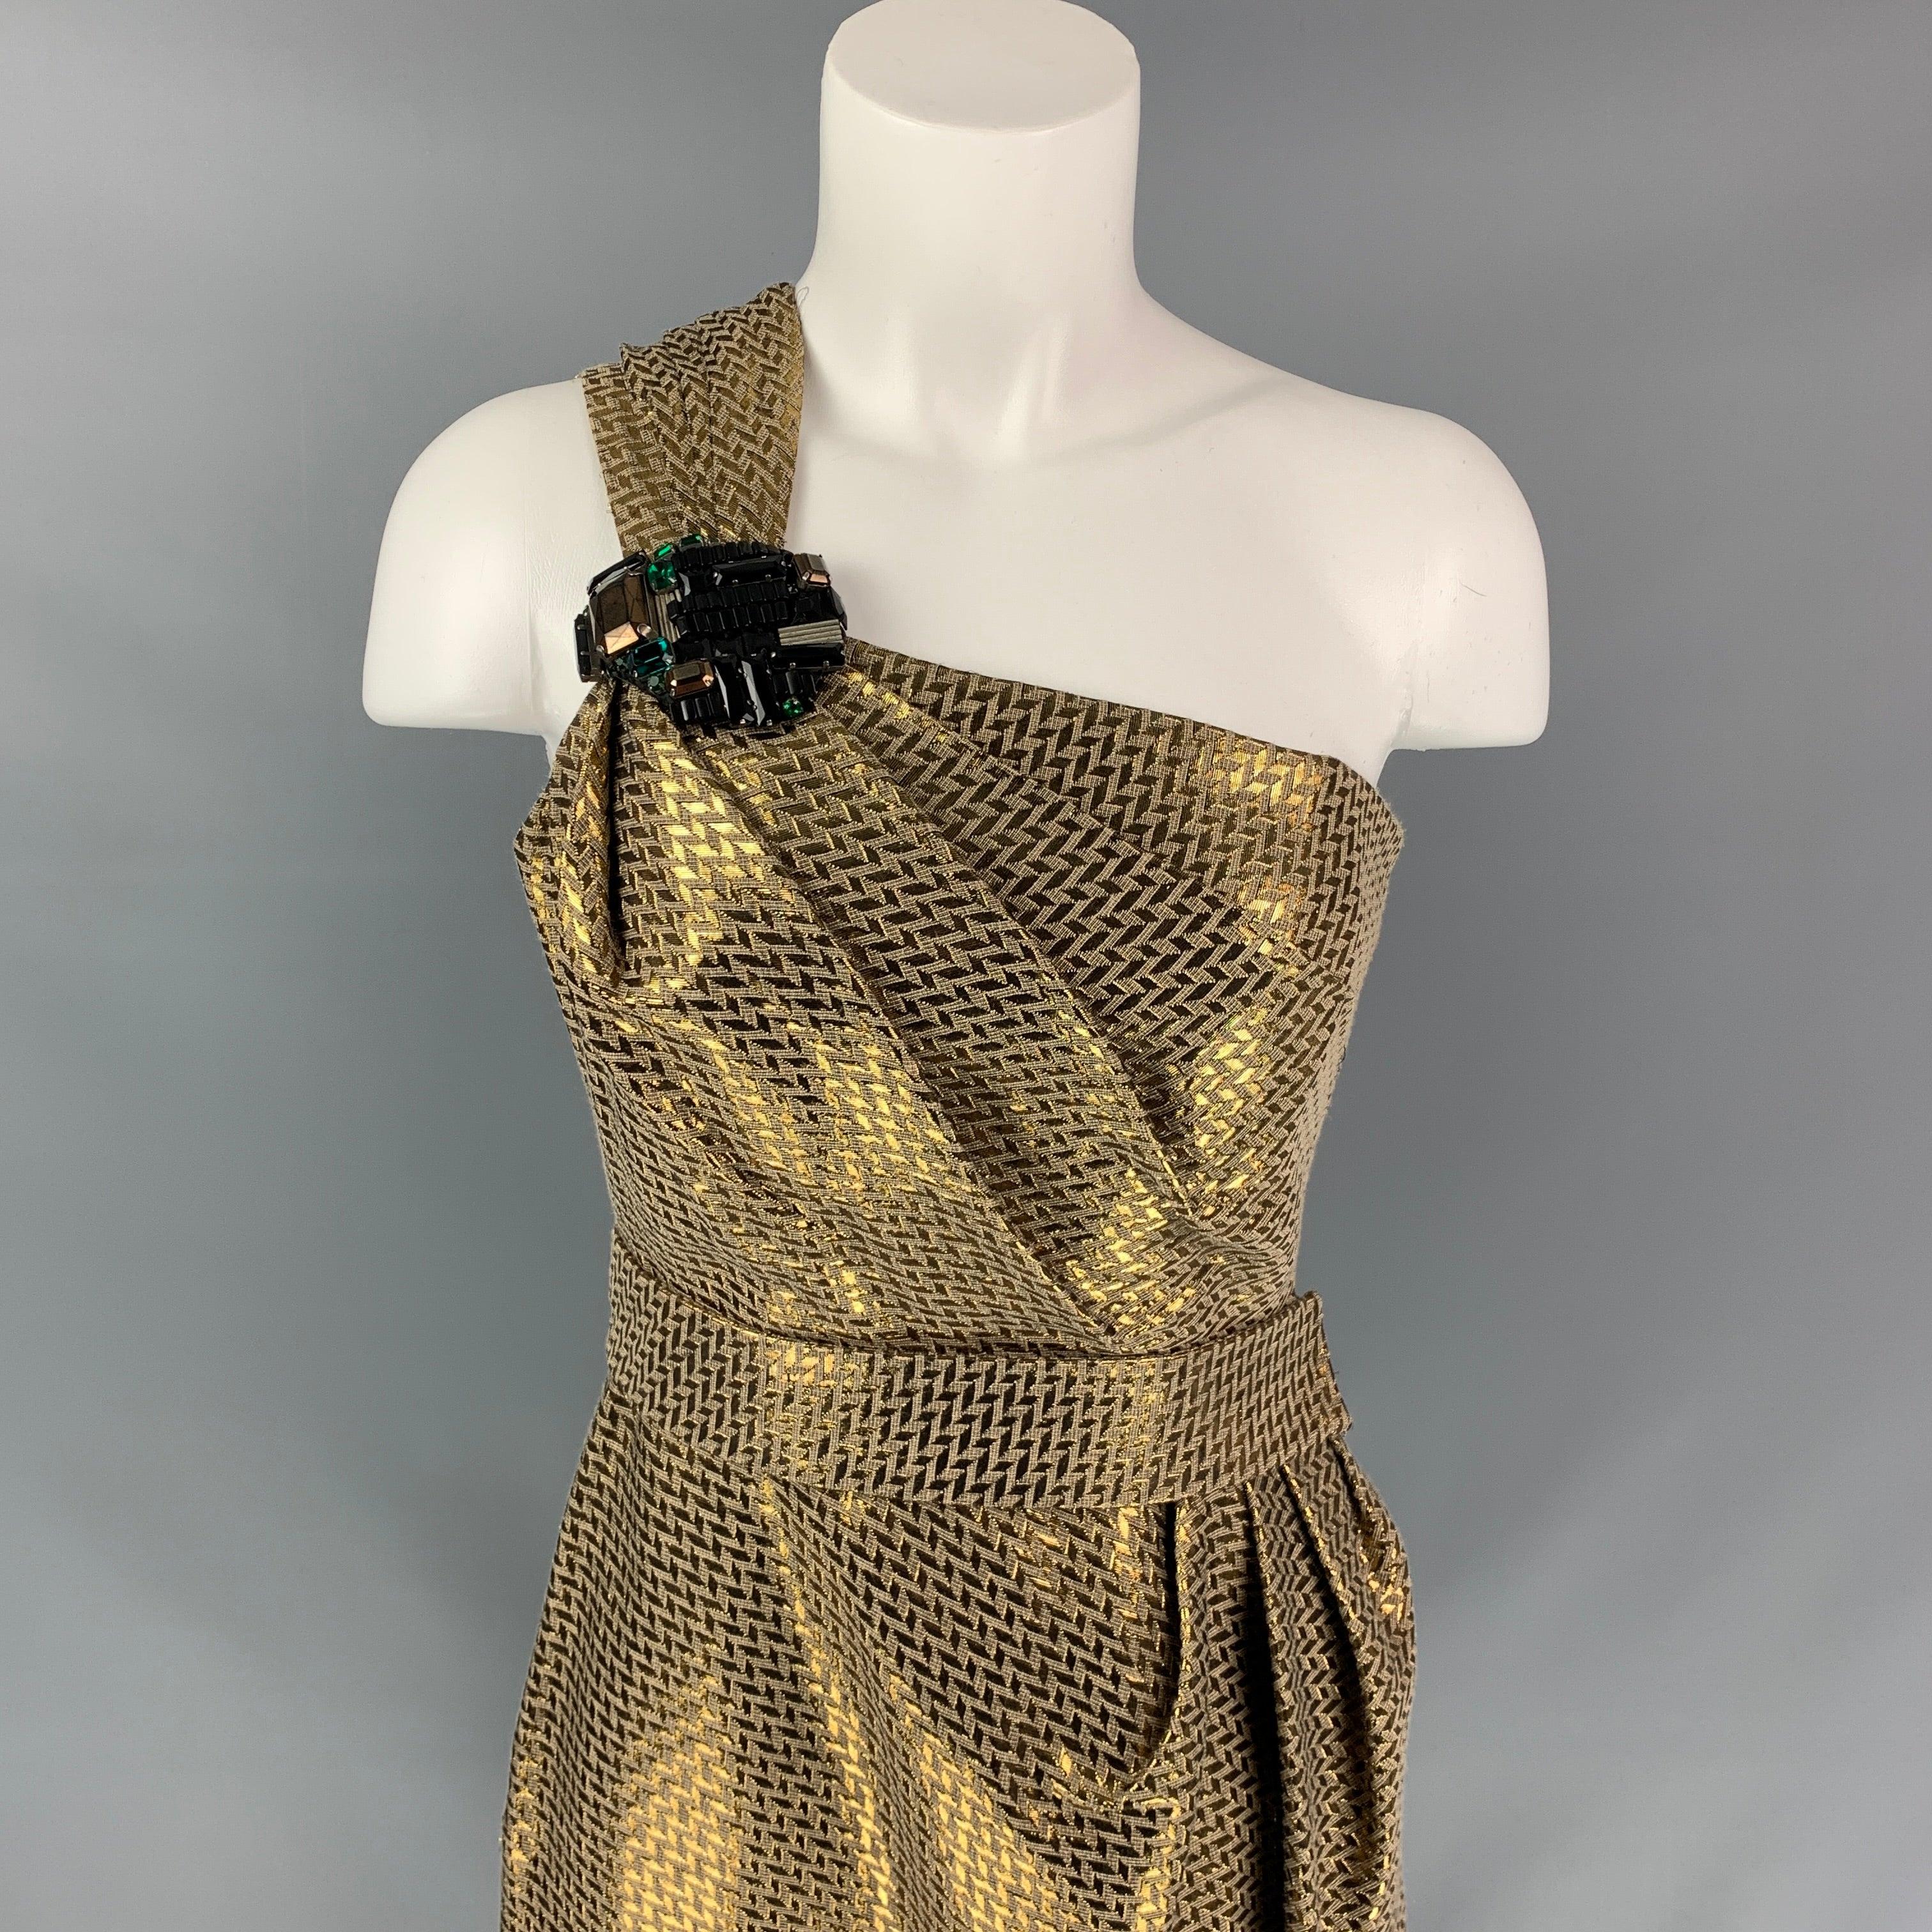 MATTHEW WILLAMSON dress comes in a gold metallic cotton blend featuring a one shoulder style, crystal embellished detail, belt strap, layered, and a zipper closure.
Very Good
Pre-Owned Condition. 

Marked:   8 

Measurements: 
  Bust: 28 inches 